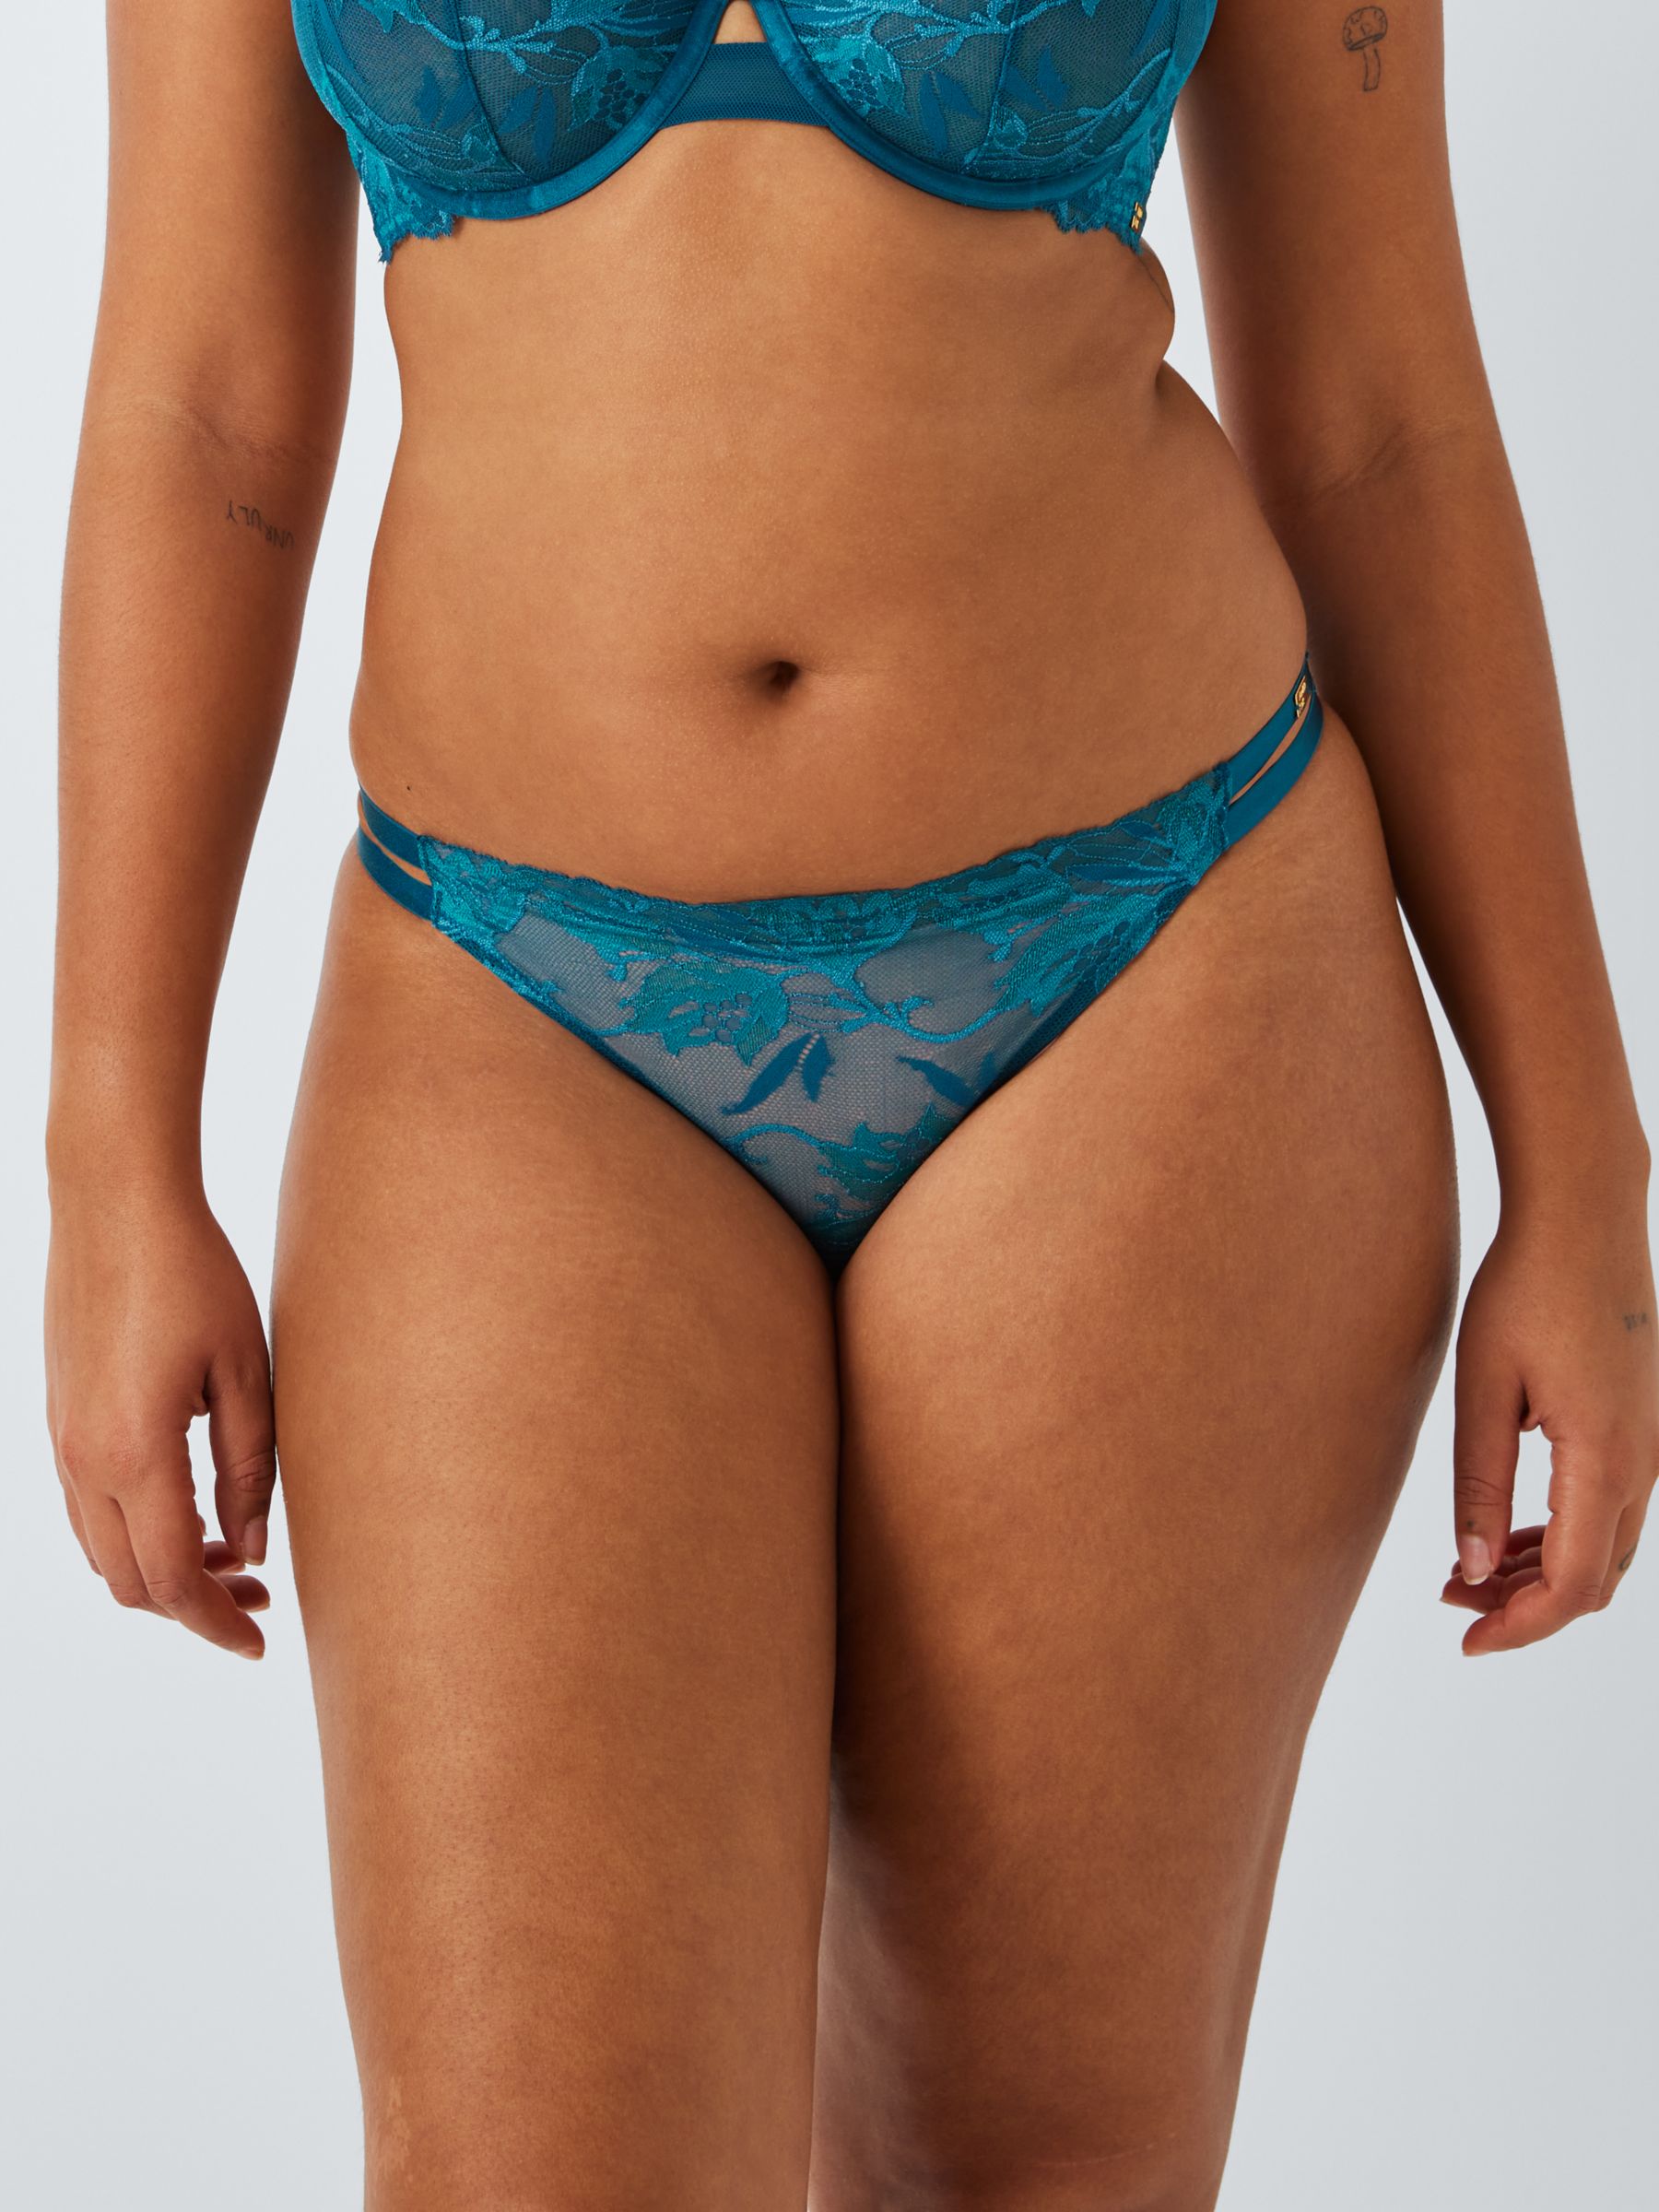 AND/OR Alexis Soft Bloom Lace Thong, Teal Blue, 8